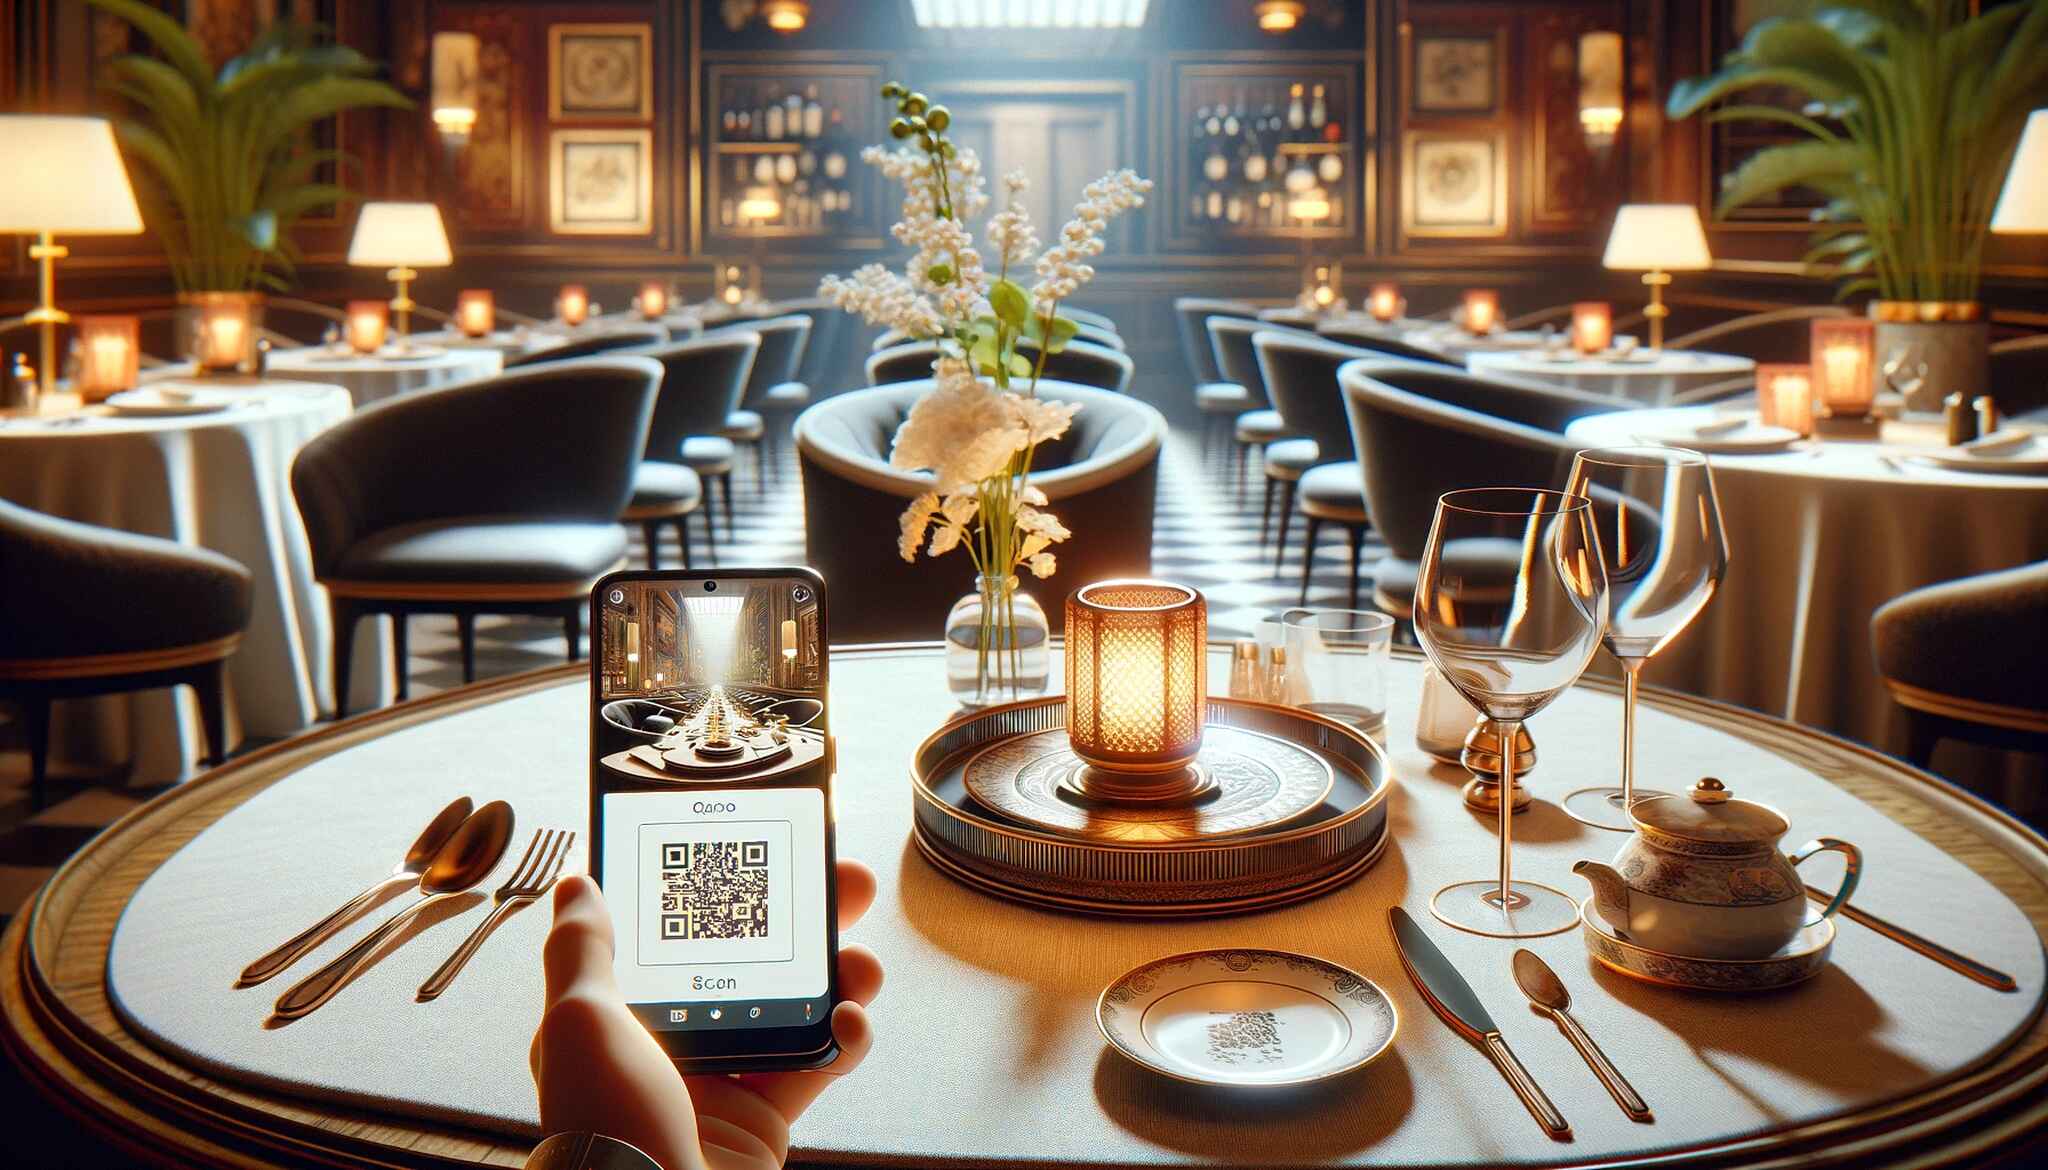 A customer using a smartphone to scan a QR code at a fancy restaurant